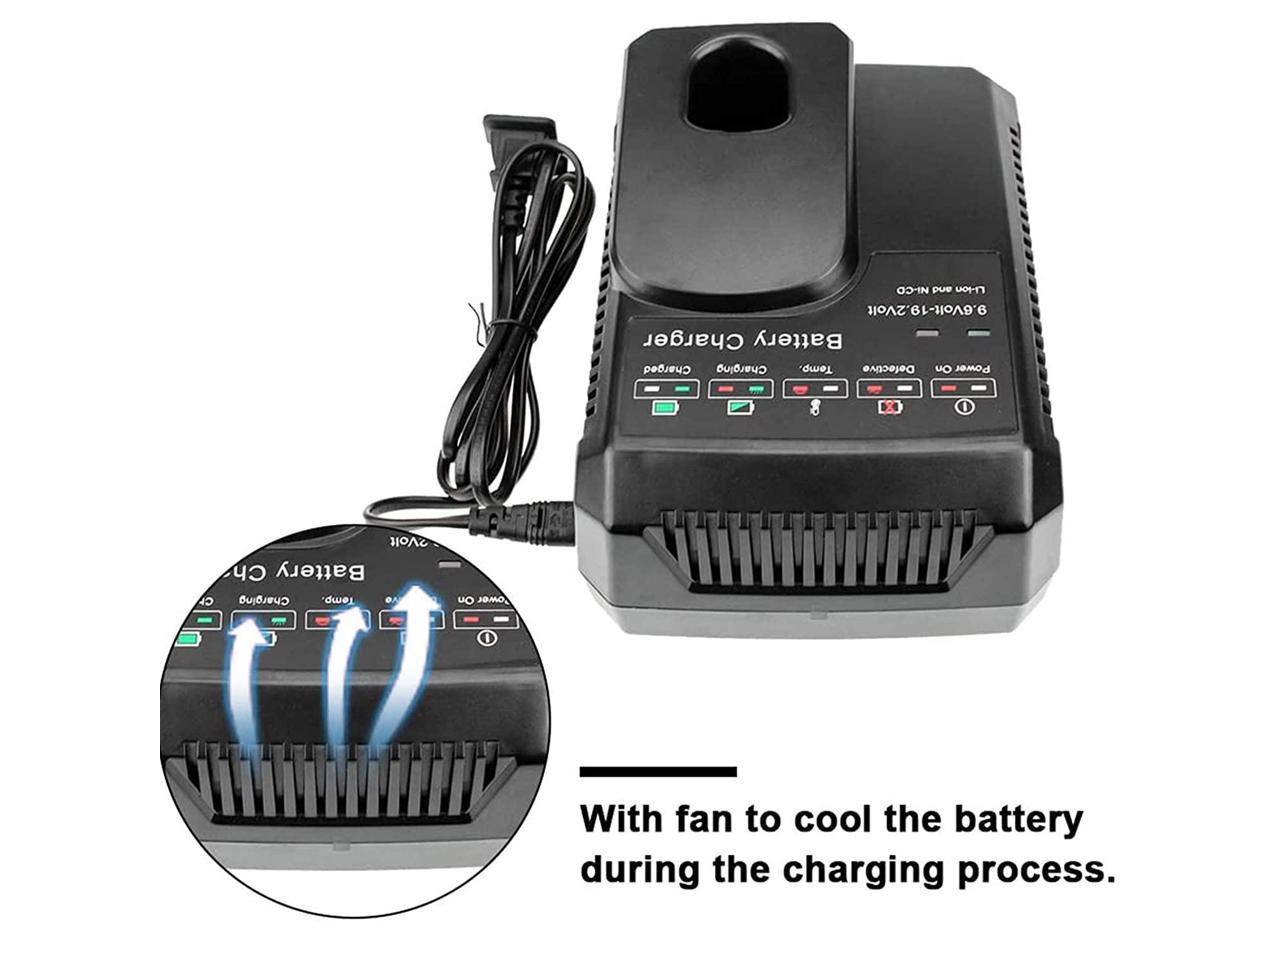 Cell9102 Replacecment Craftsman 19.2 Volt Battery Charger for Craftsman C3 DieHard XCP 1425301 1323903 130279005 11375 11376 315.PP2011 